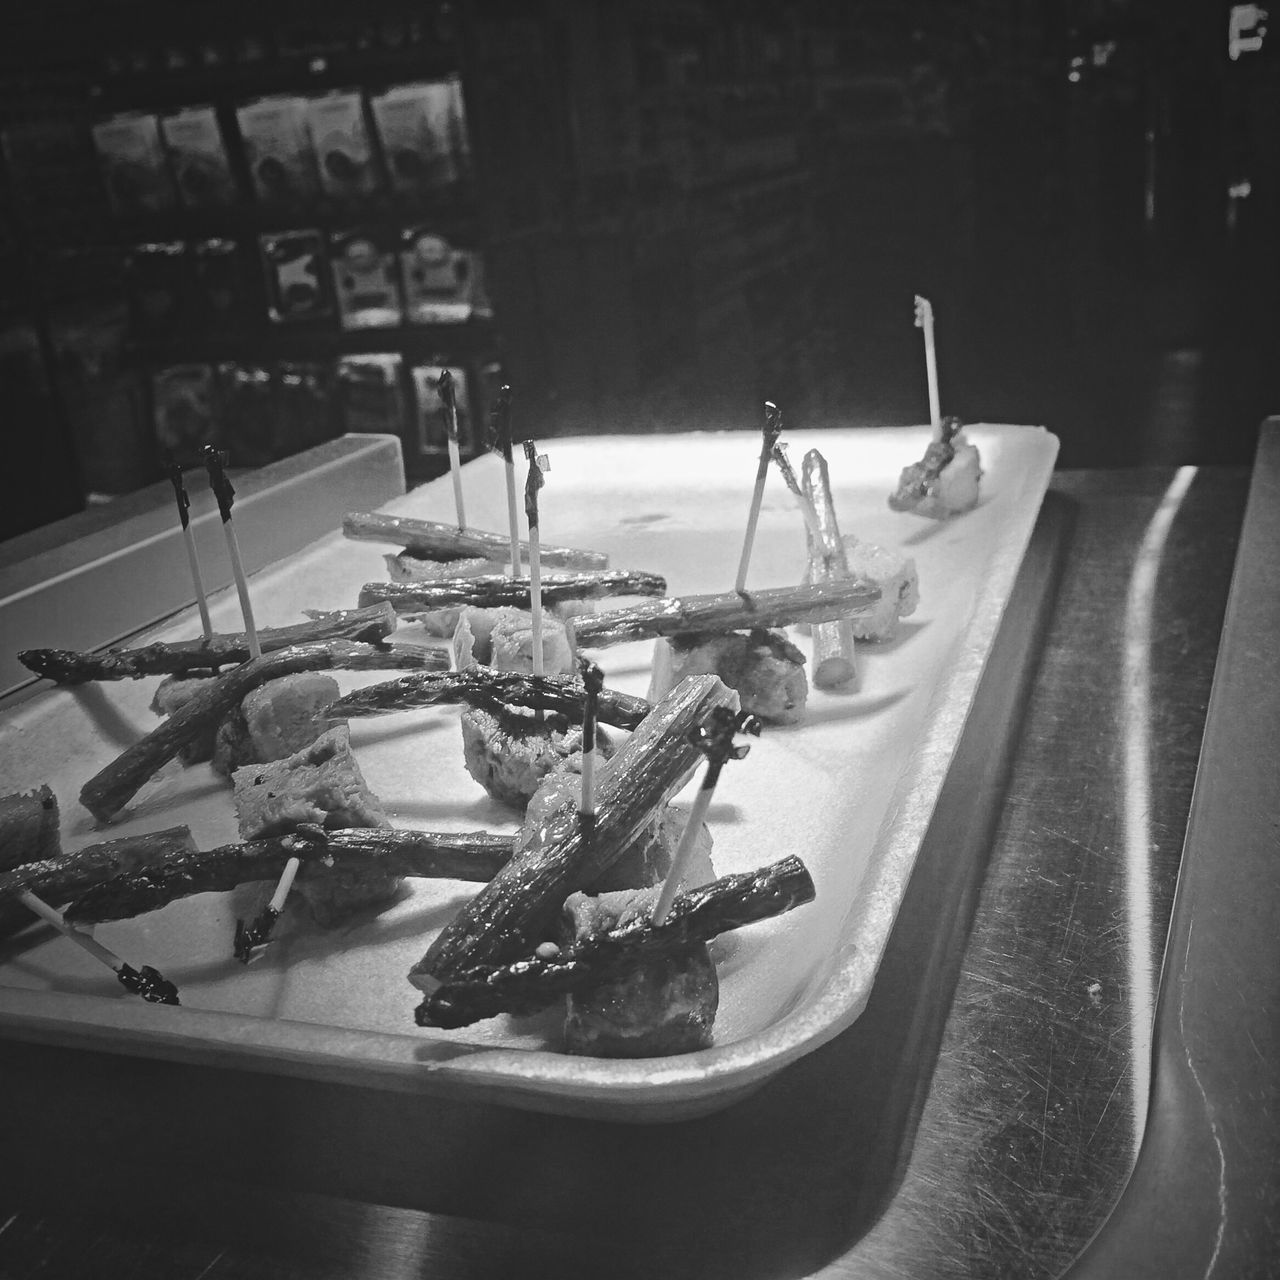 food, indoors, food and drink, high angle view, fish, seafood, still life, table, transportation, no people, plate, mode of transport, healthy eating, fork, dead animal, freshness, day, large group of objects, abundance, close-up